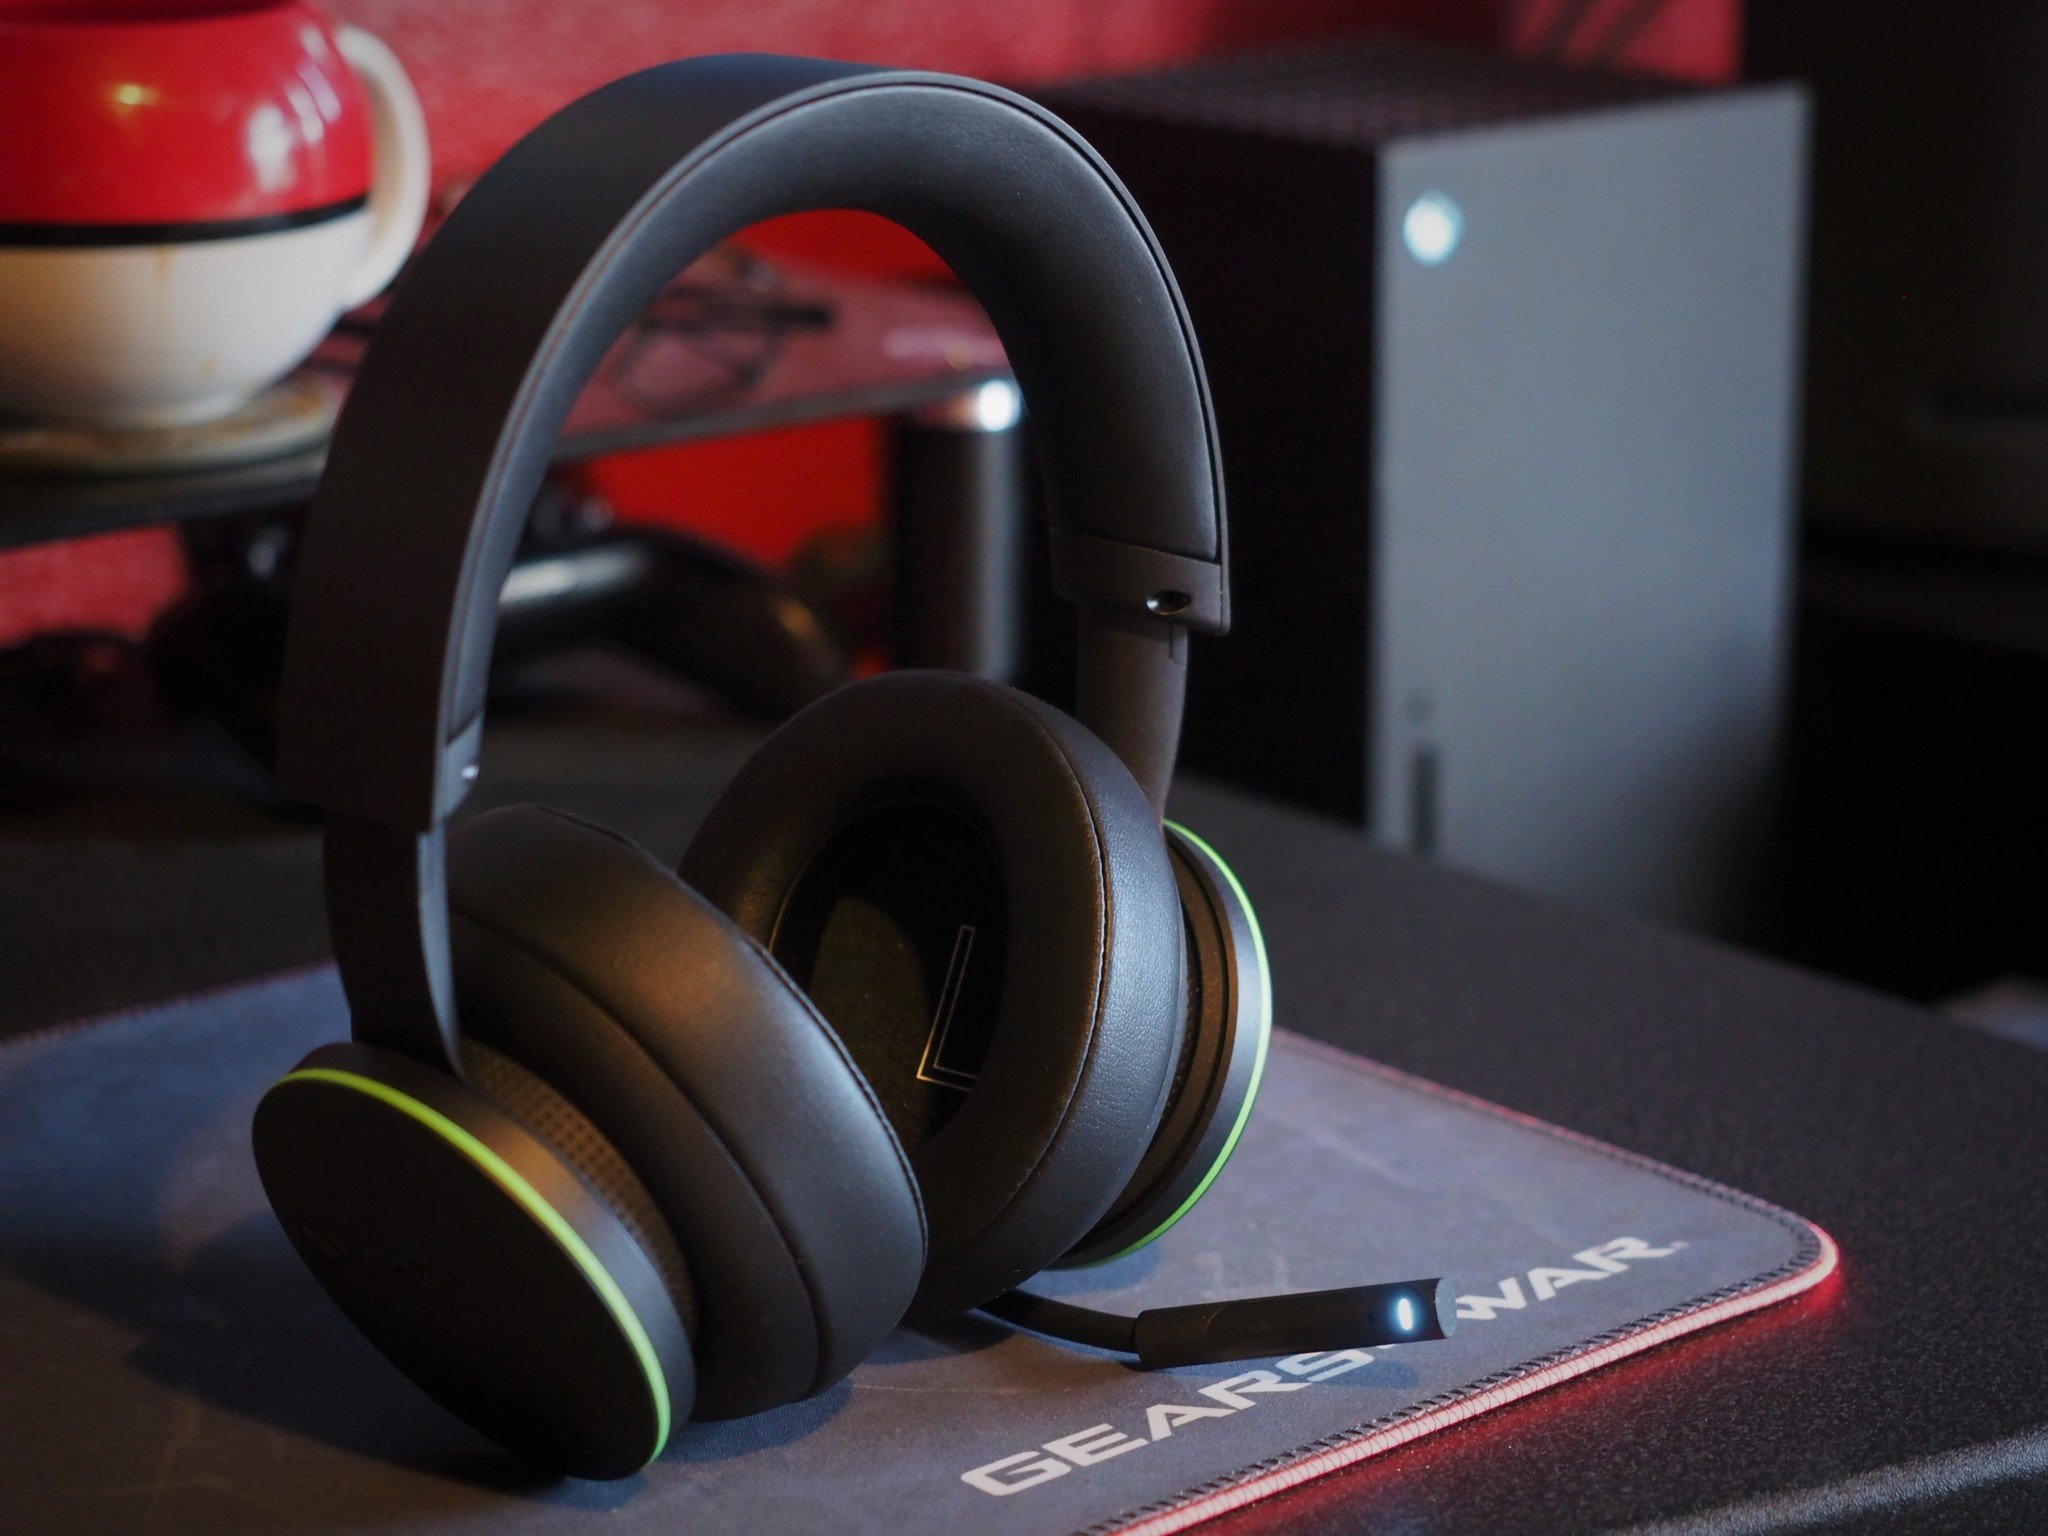 Official Xbox Wireless Headset review: A decent $99 option with